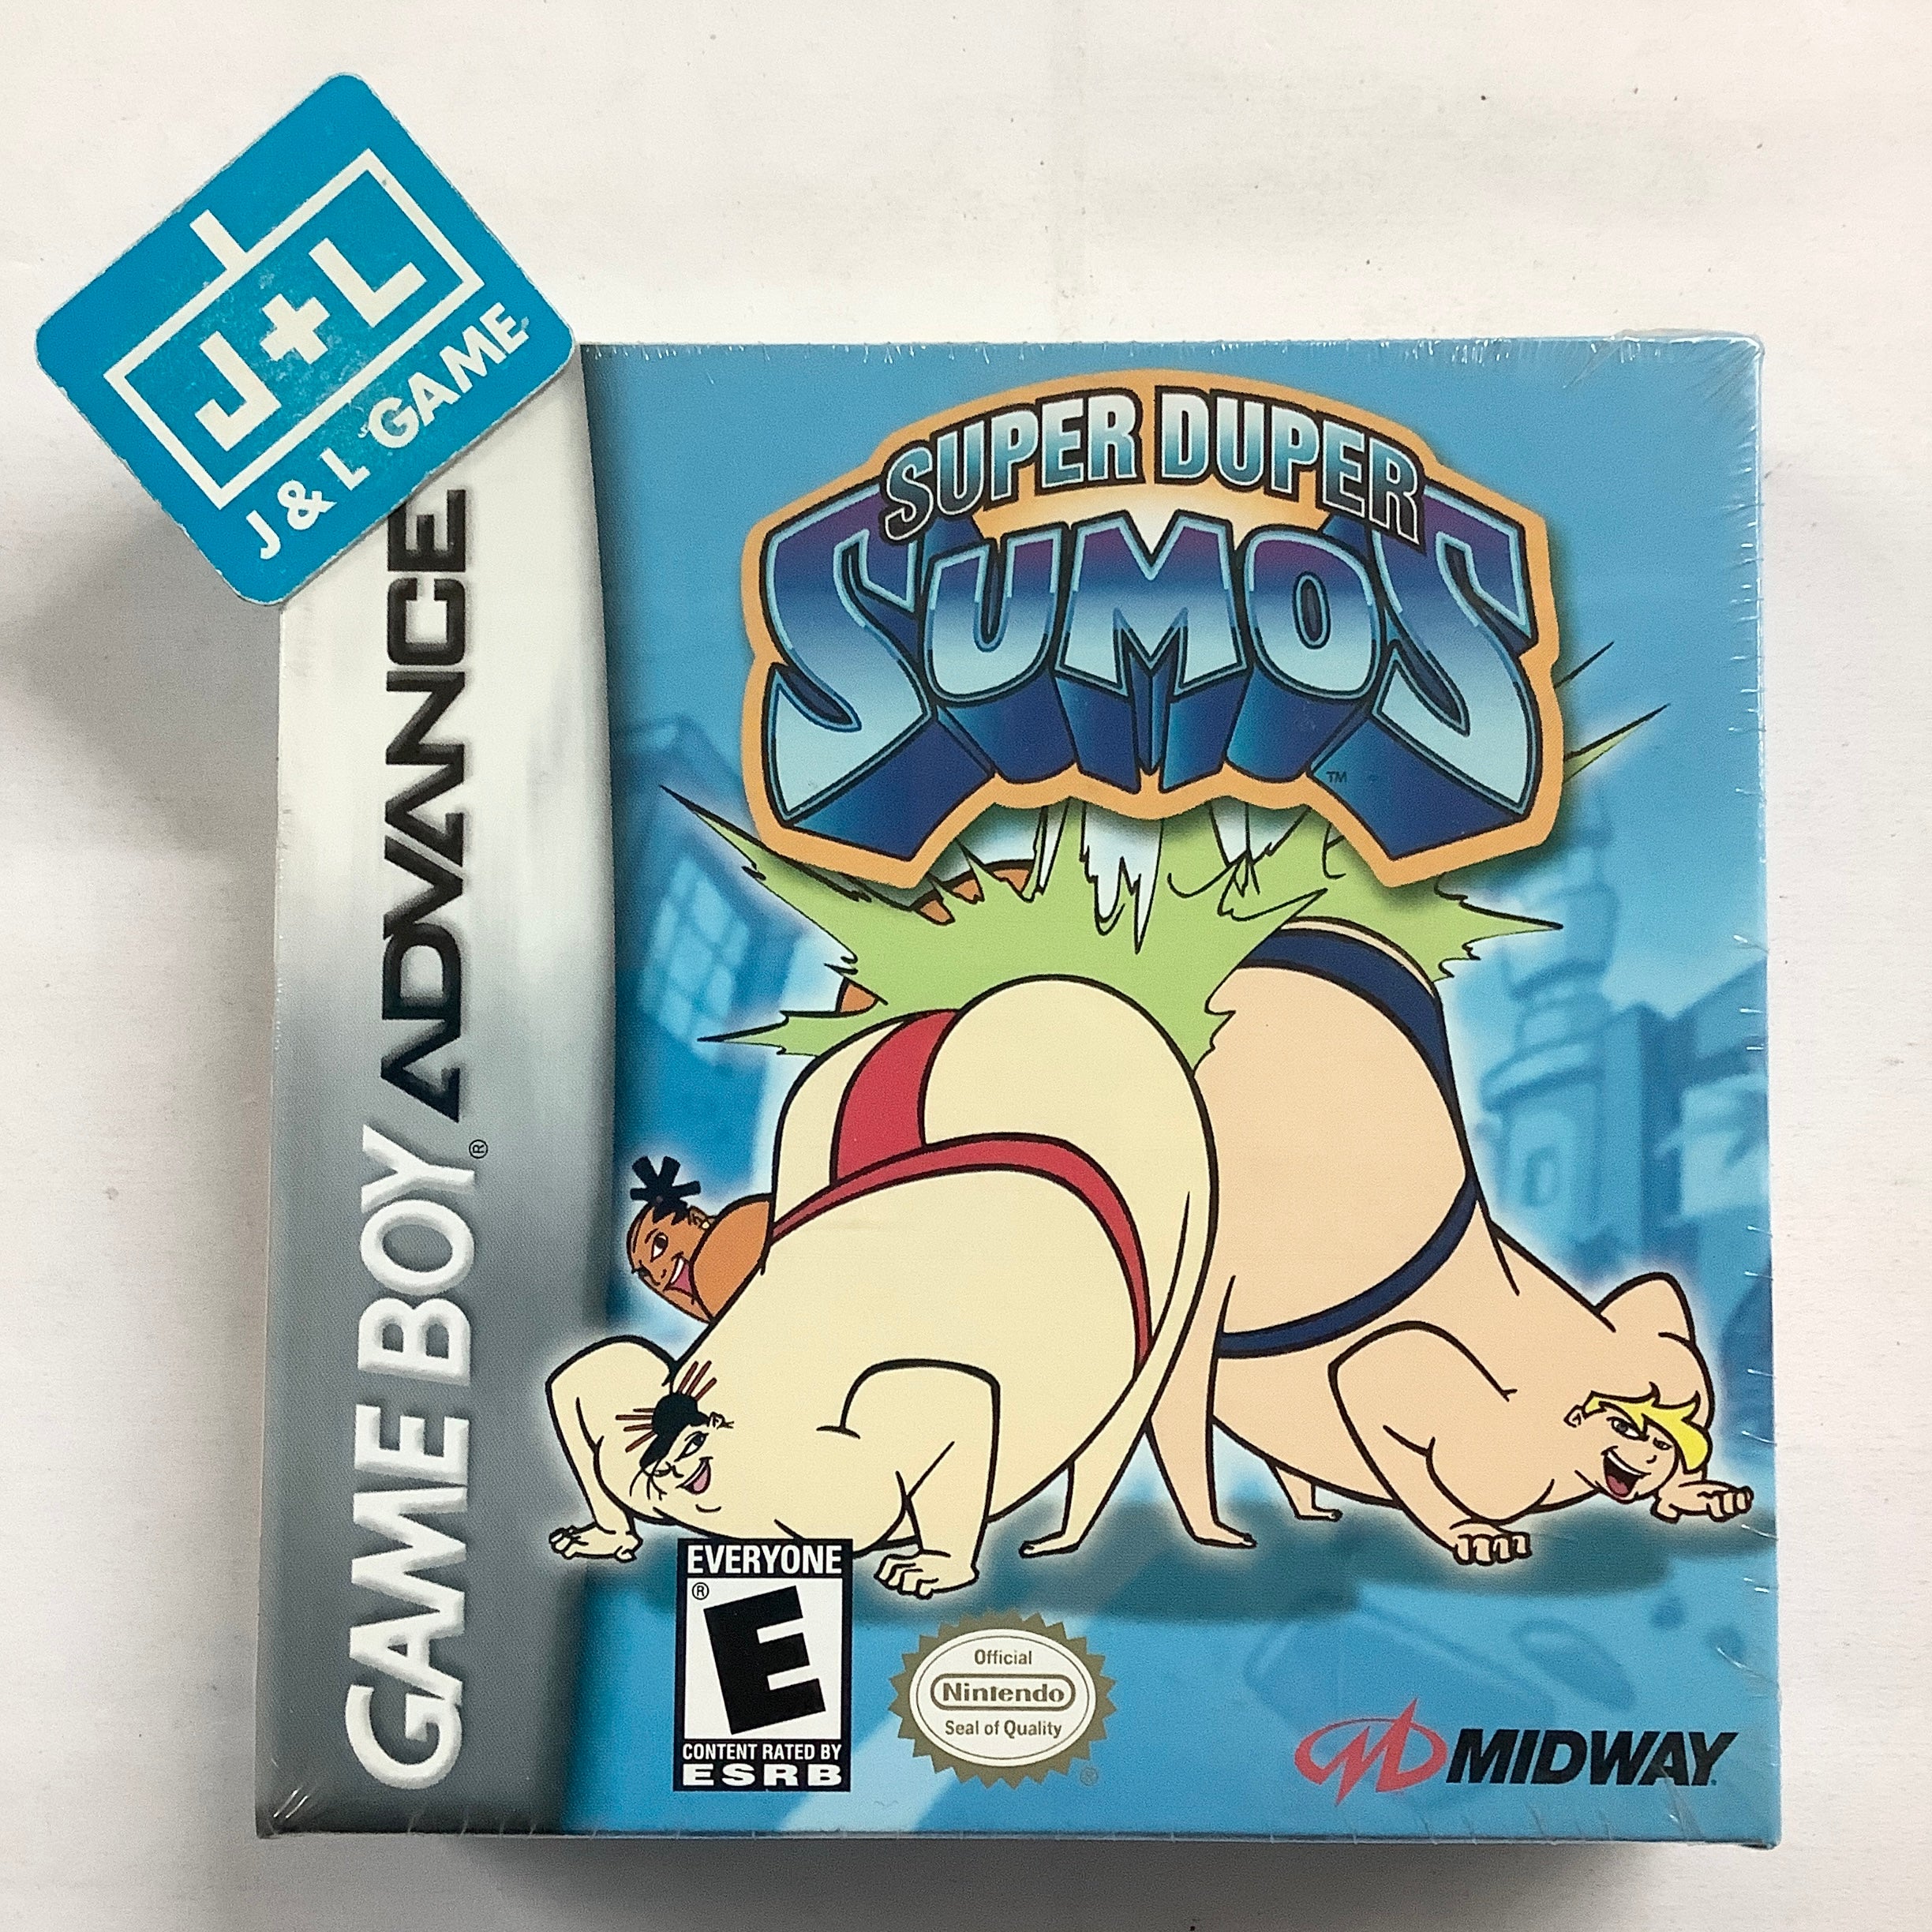 Super Duper Sumos - (GBA) Game Boy Advance Video Games Midway   